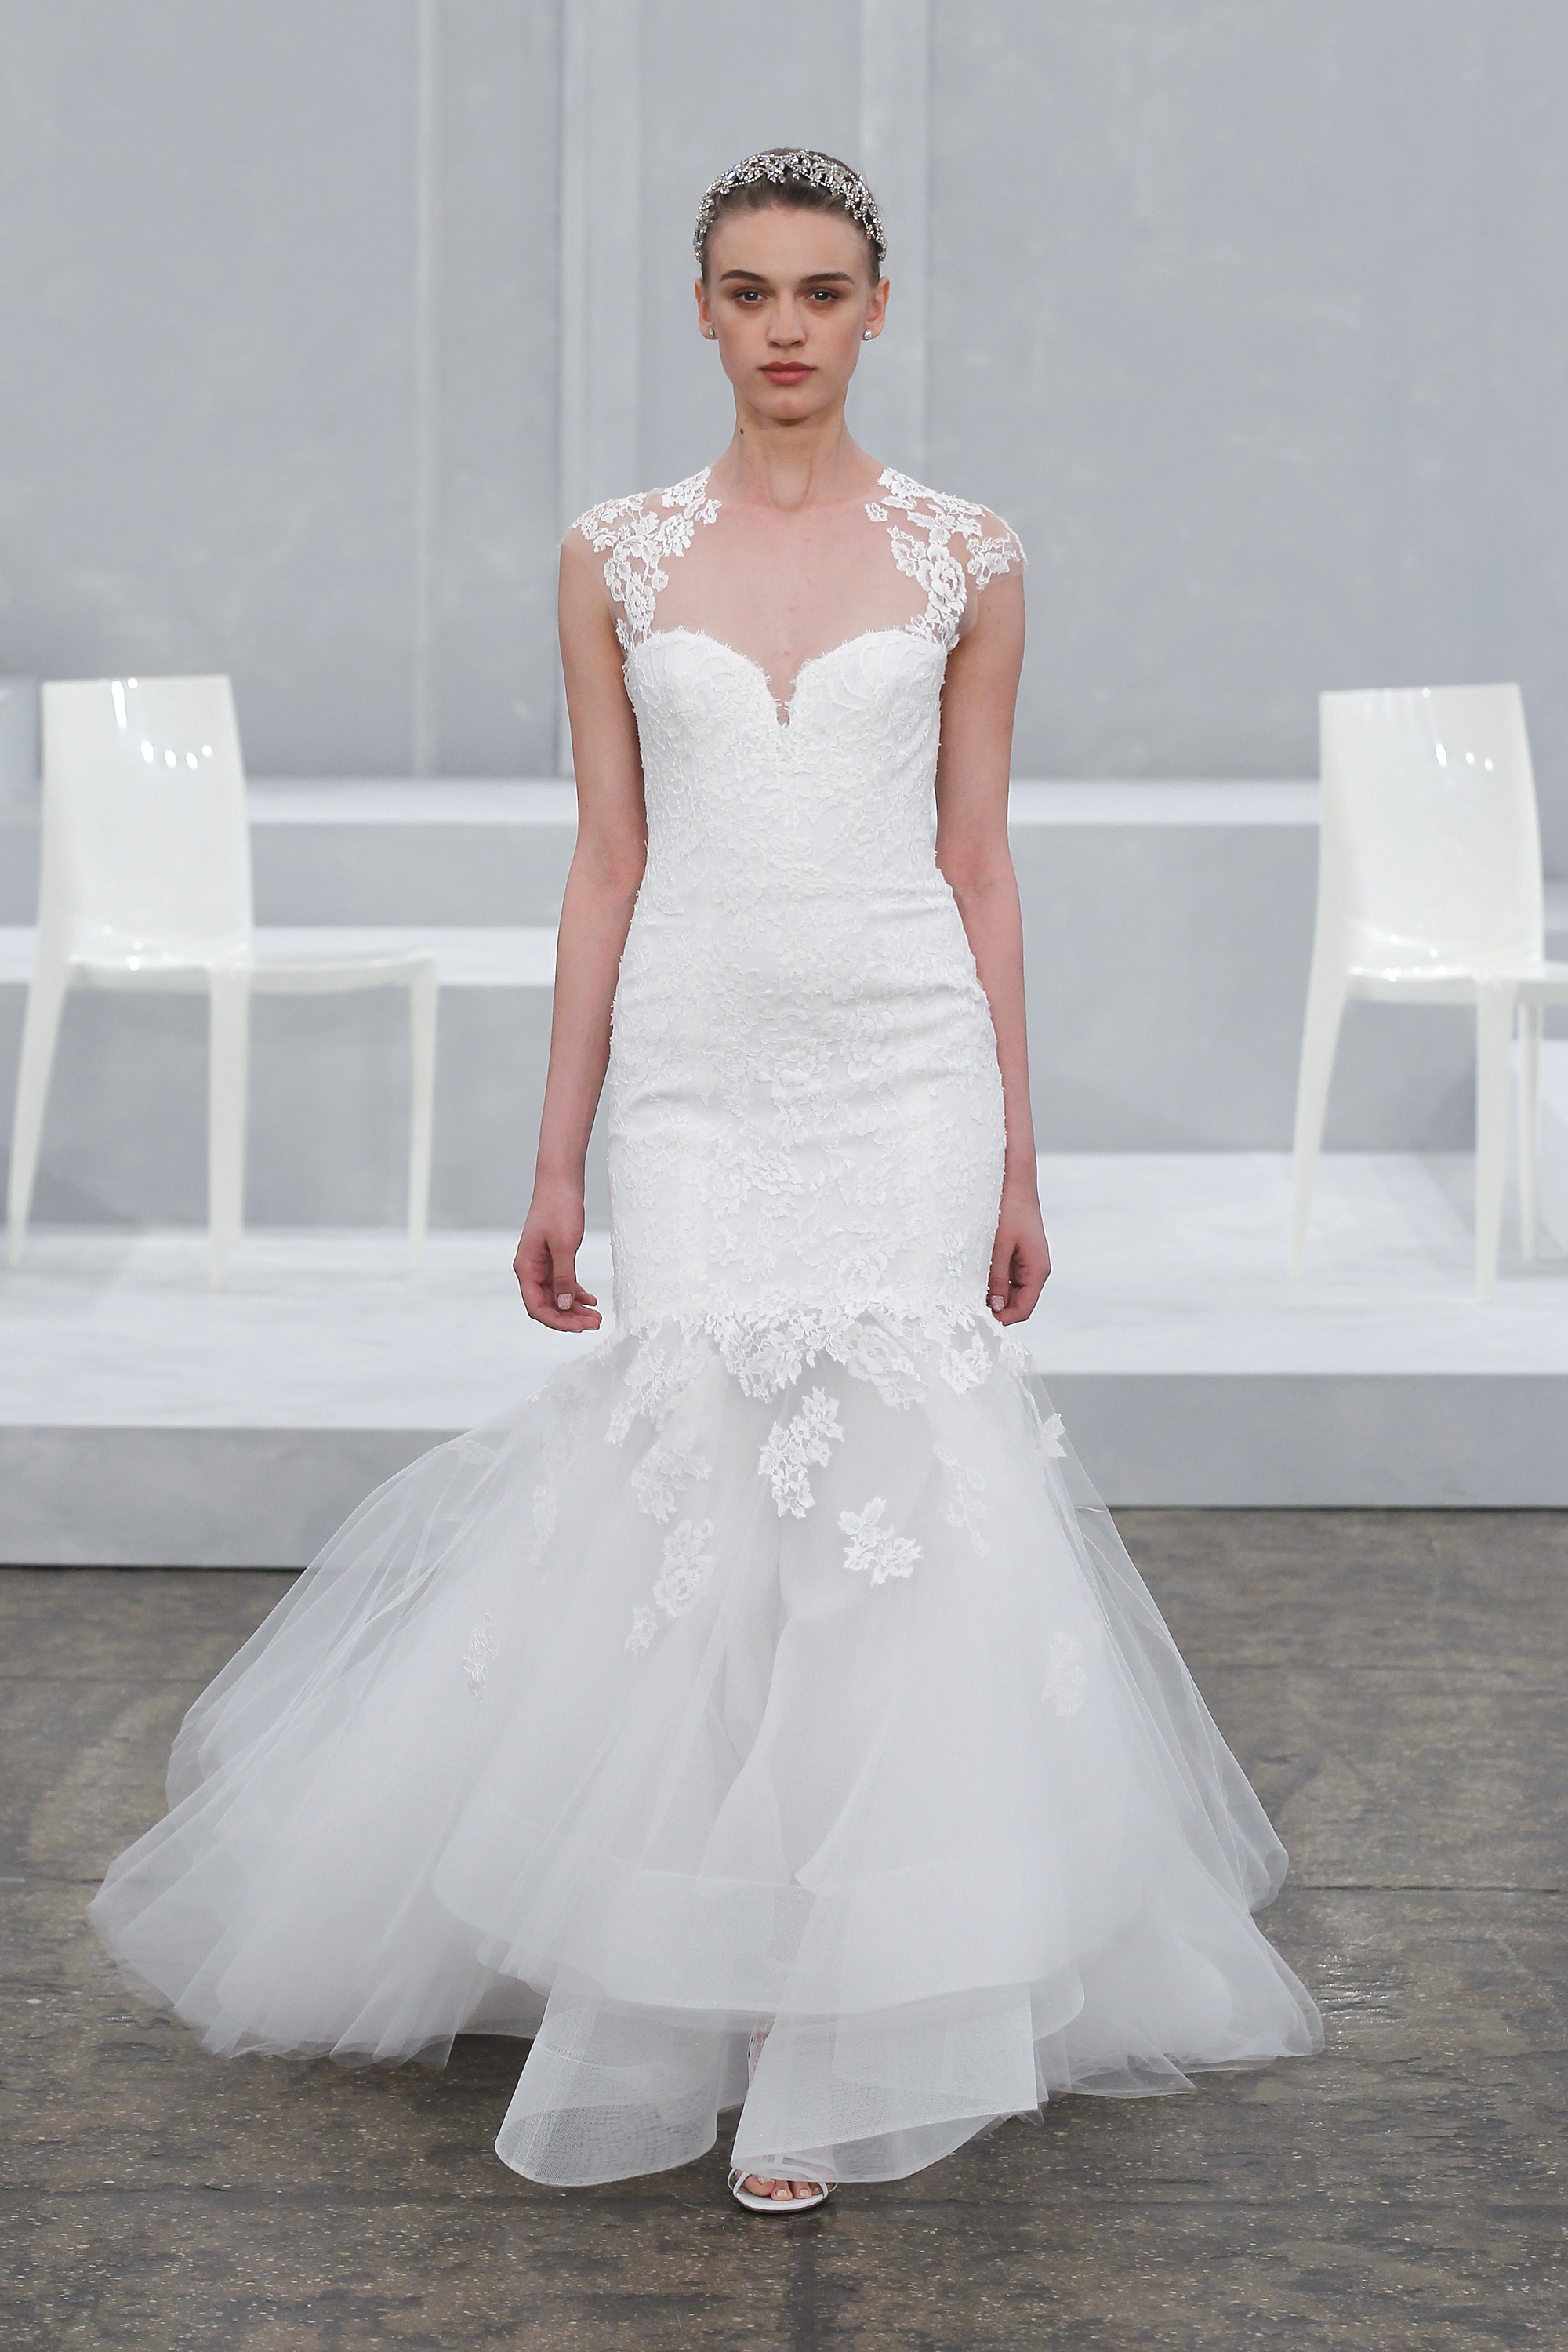 A Crown Adorned Bride from Monique Lhuilliers Springl 2015 Bridal Collection